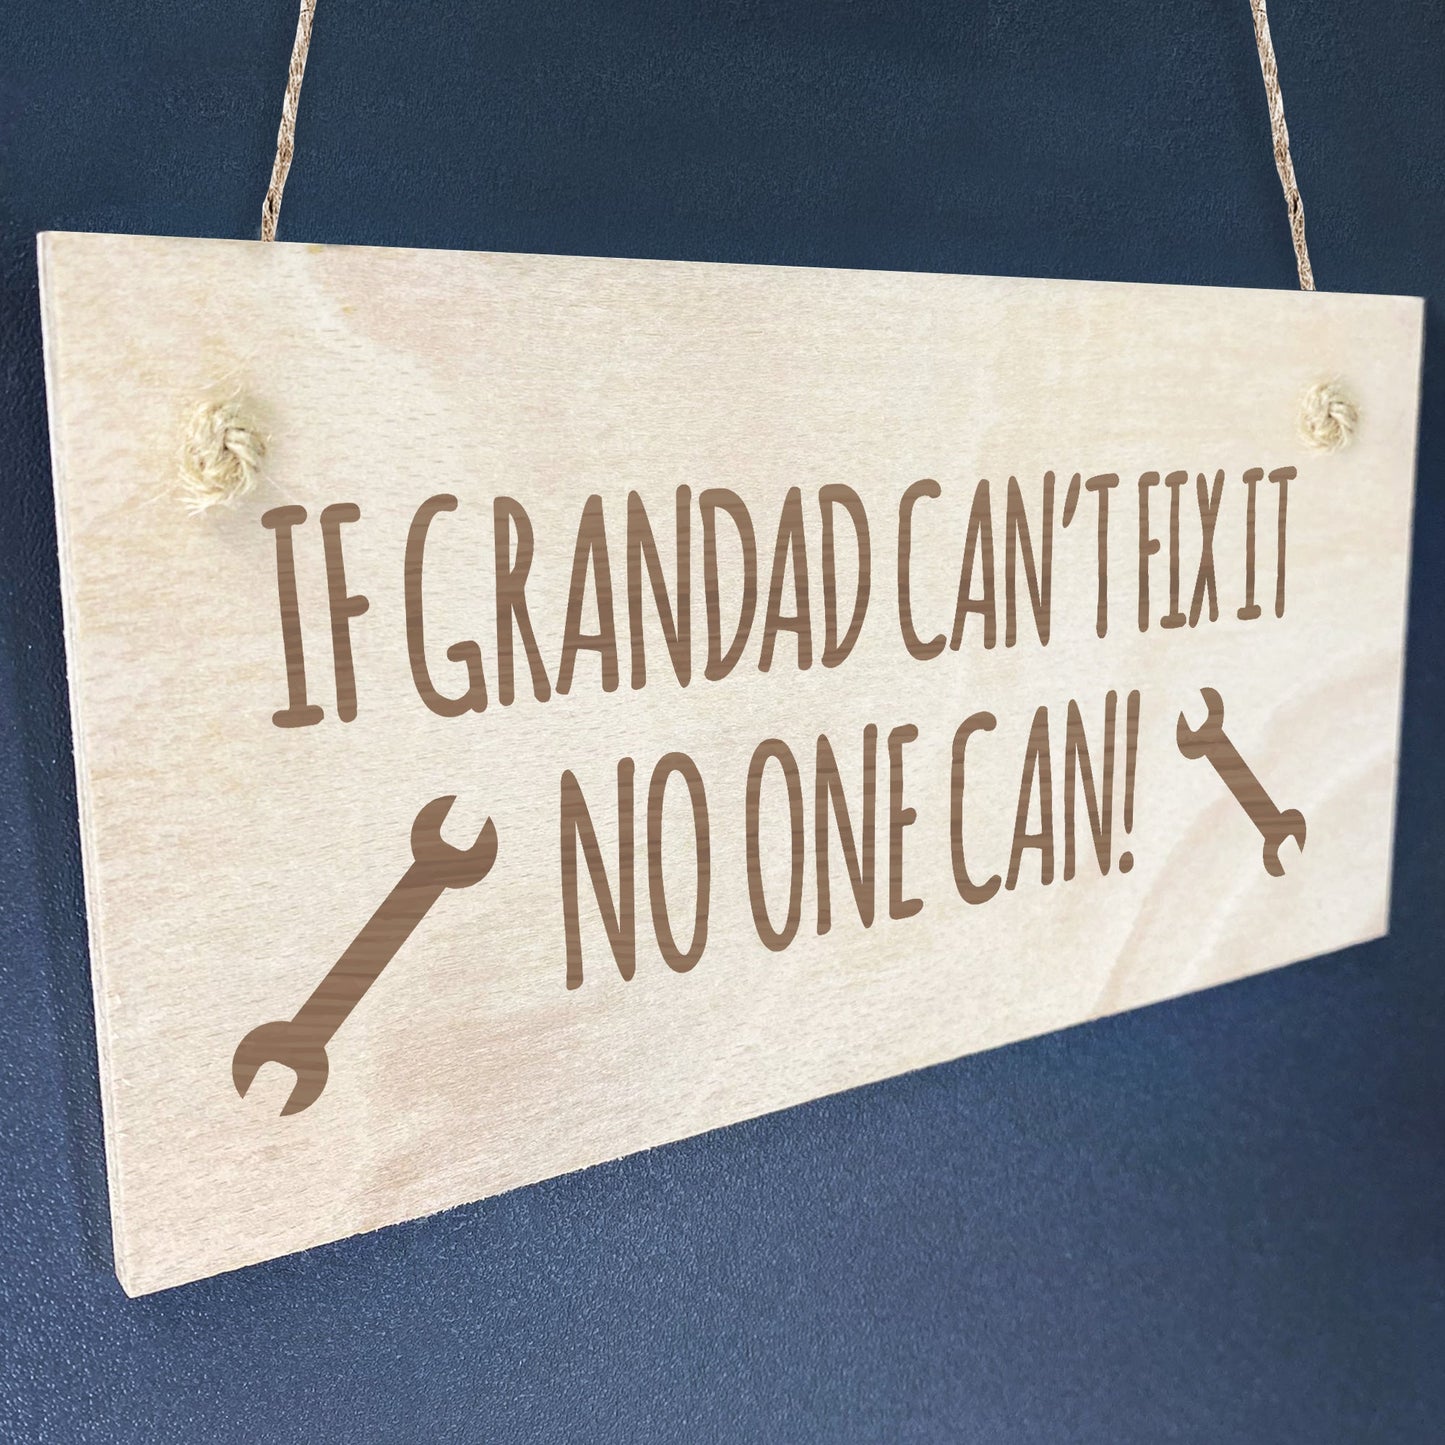 Grandad Gifts Novelty Engraved Wood Plaque Birthday Fathers Day